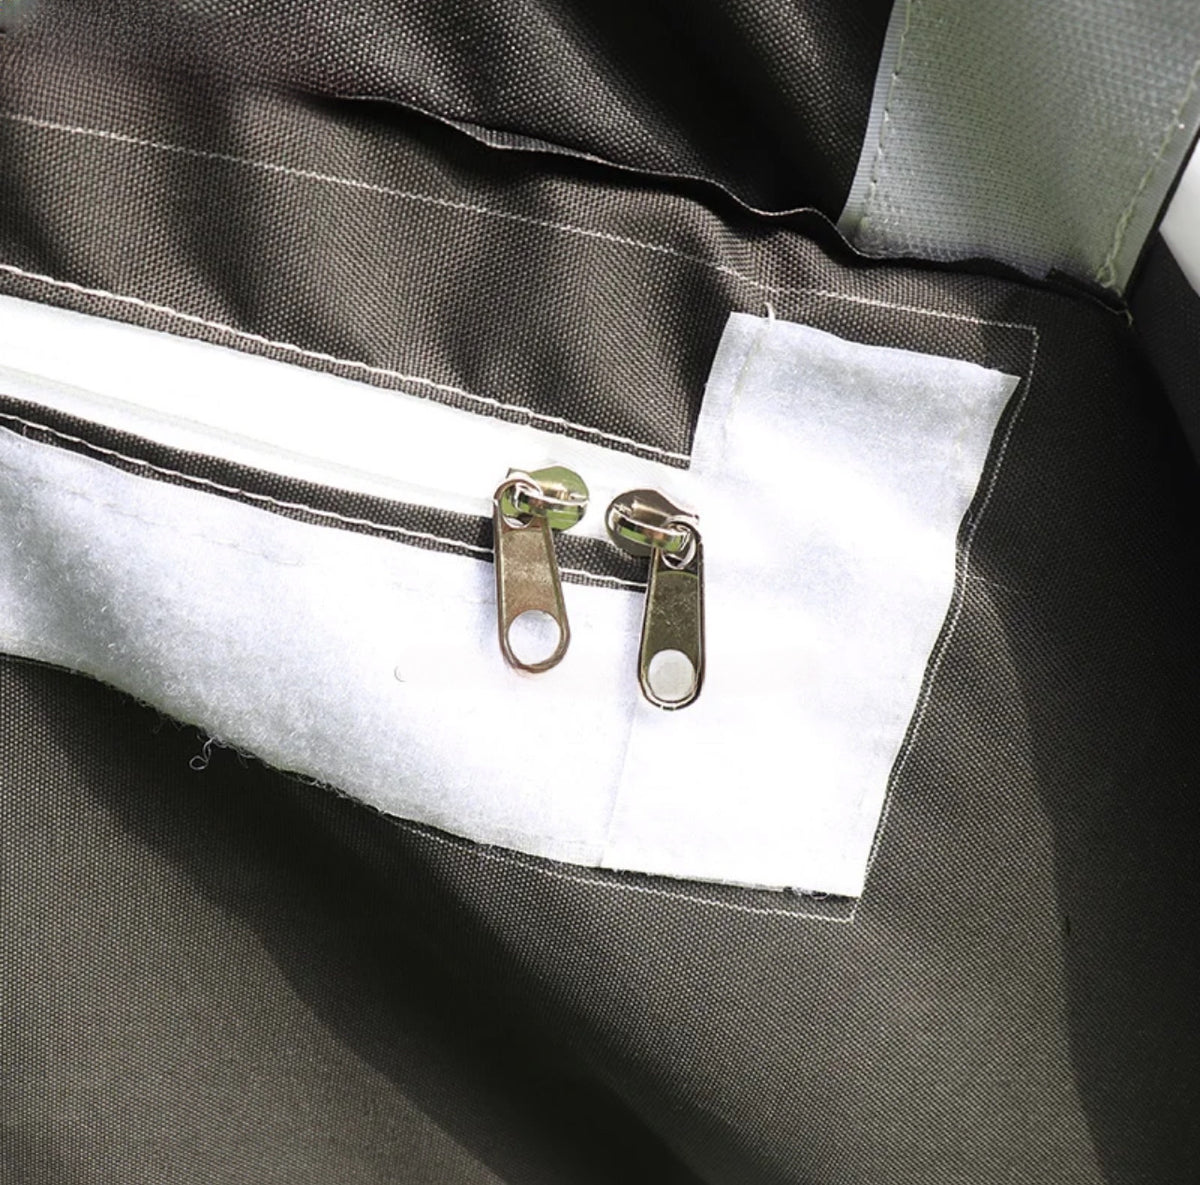 a close up of a pair of scissors in a pocket